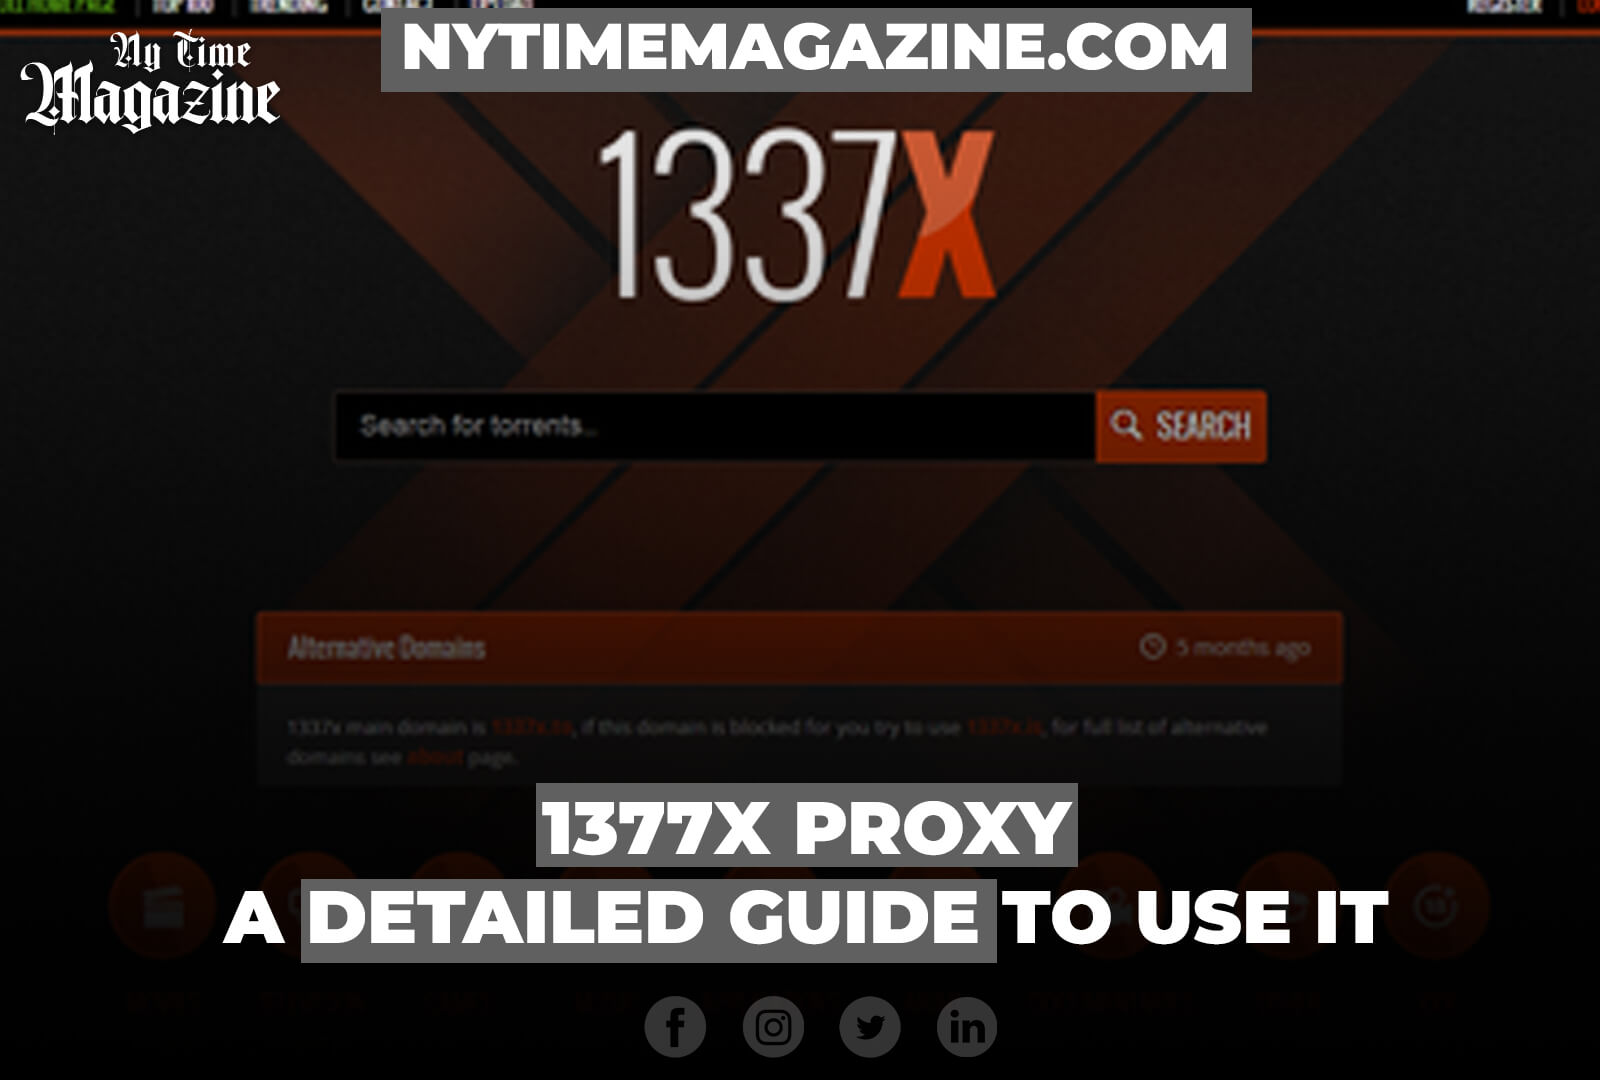 1377x Proxy: A Detailed Guide To Use It